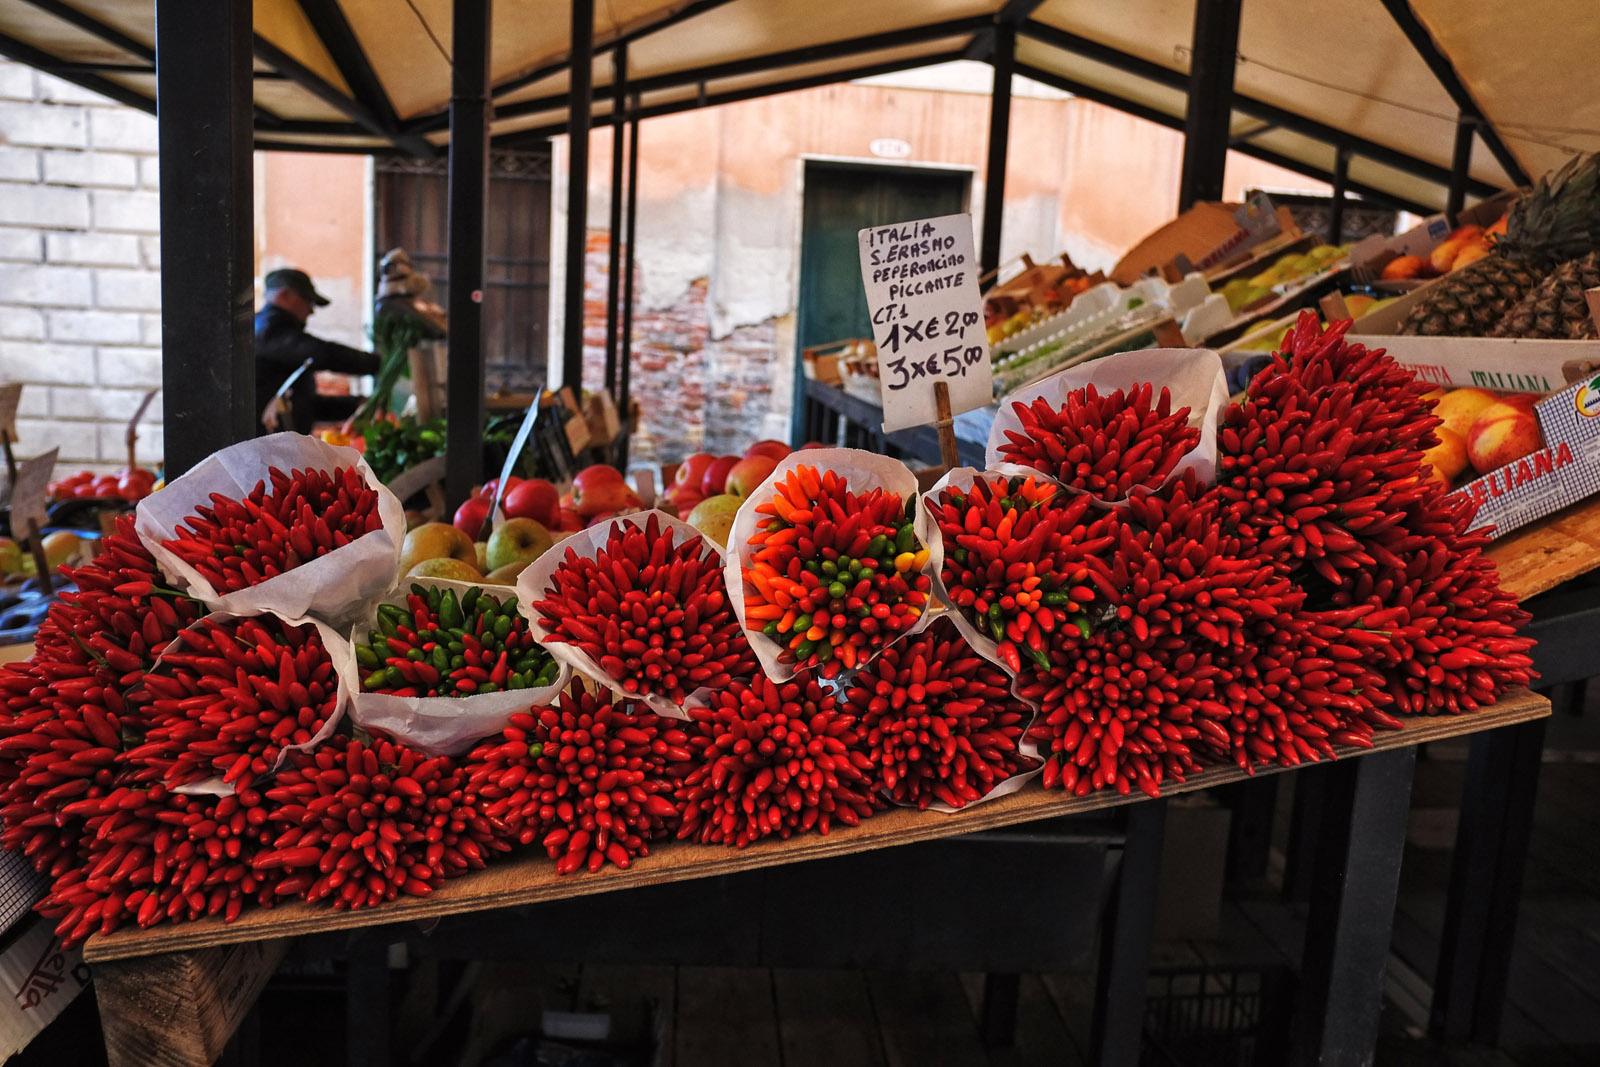 Bundles of red chili peppers on a market stall table at the Rialto Markets. Travel and lifestyle photography by Kent Johnson.